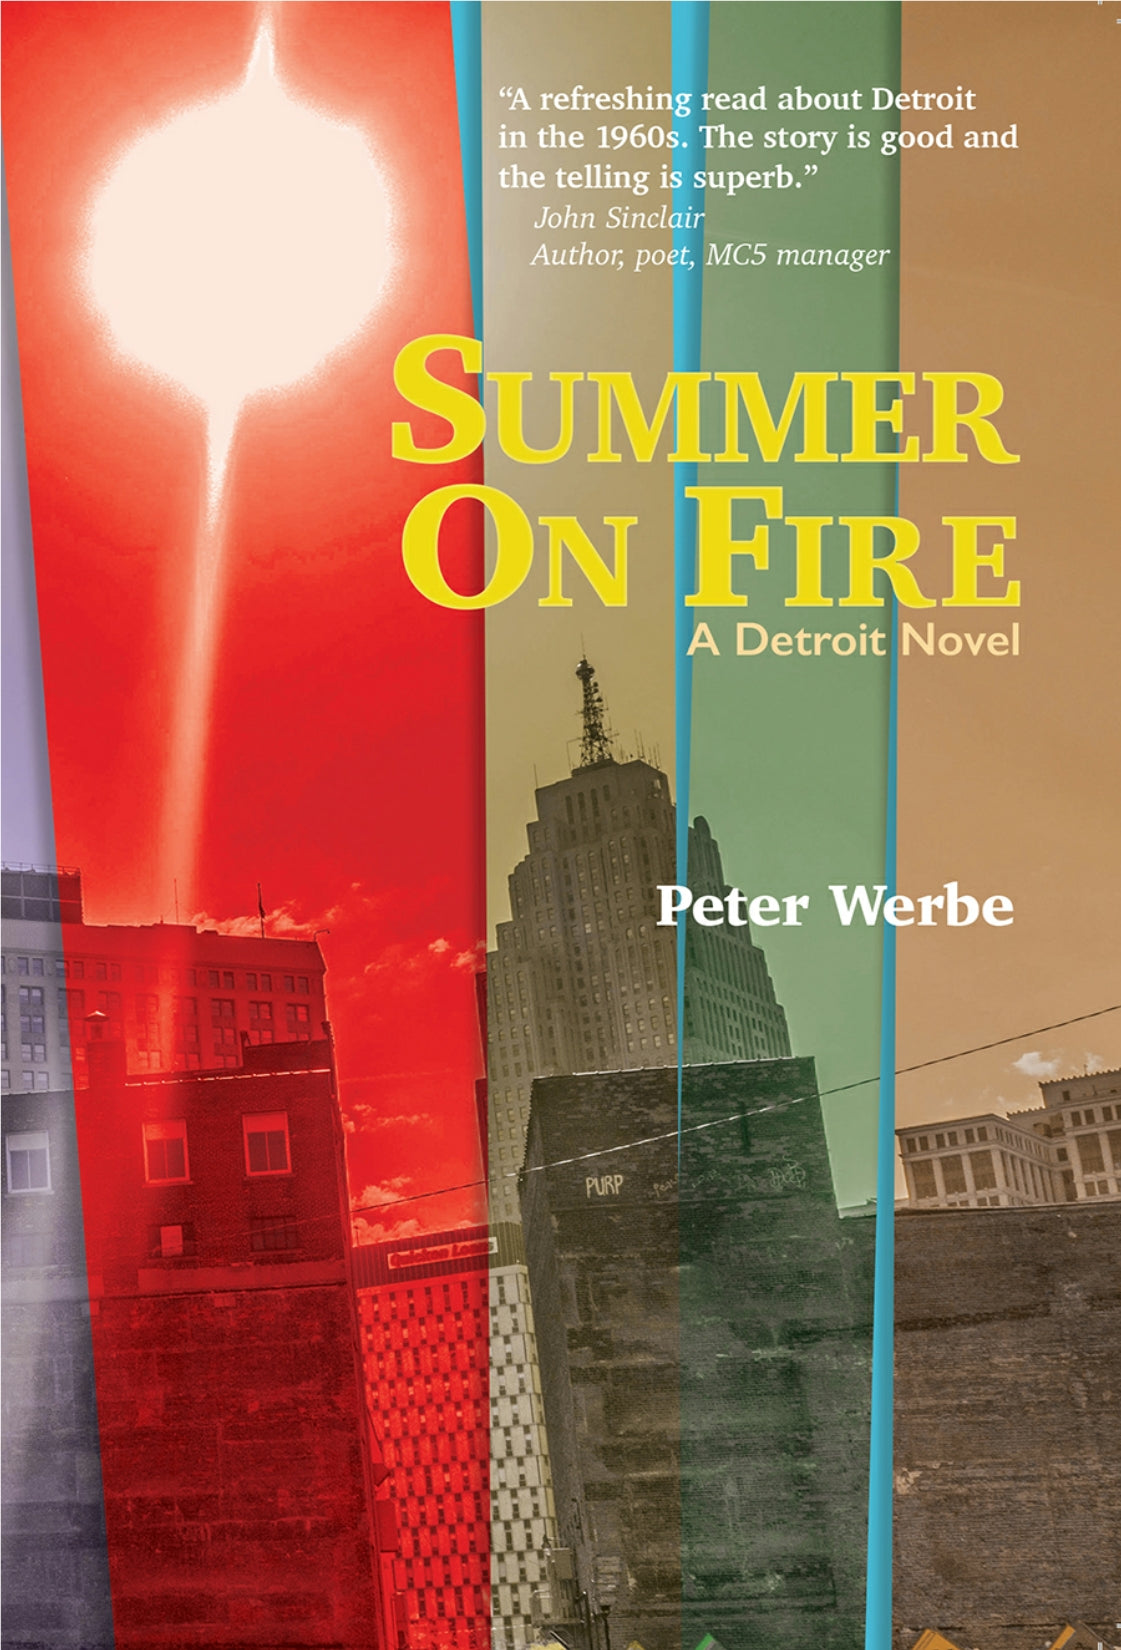 Summer On Fire-Peter Werbe signed copies